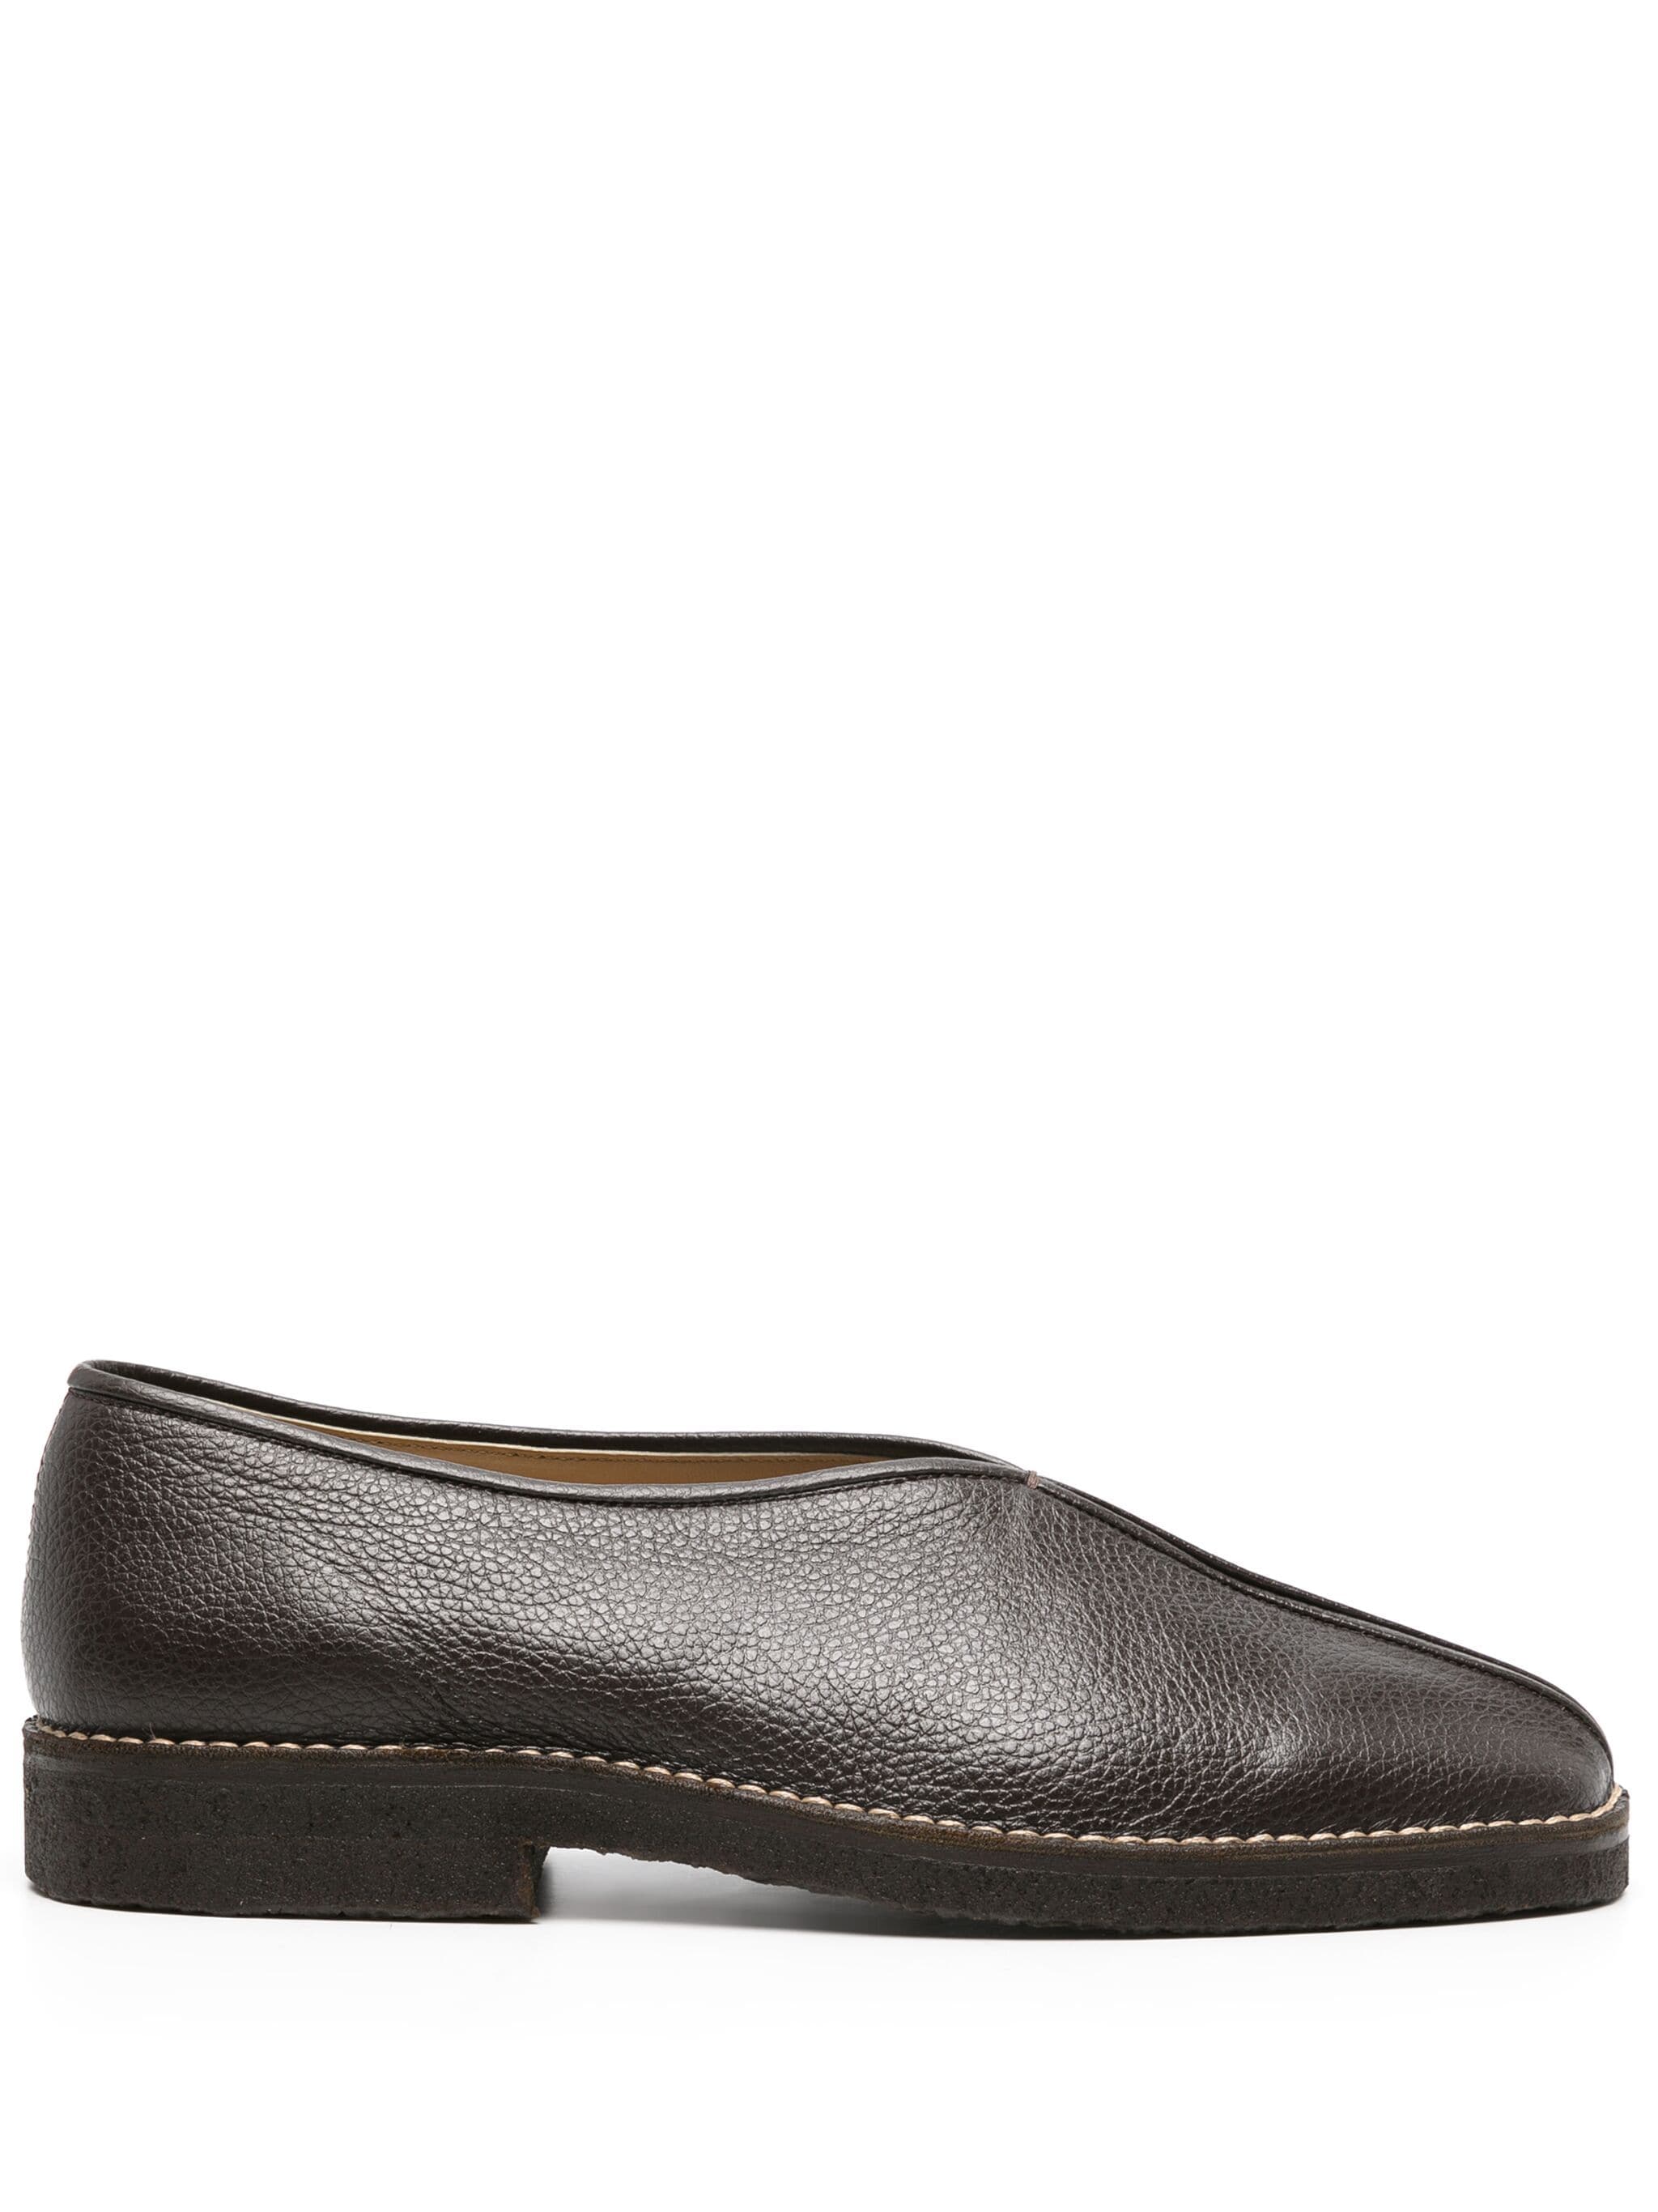 LEMAIRE Men Piped Crepe Slippers